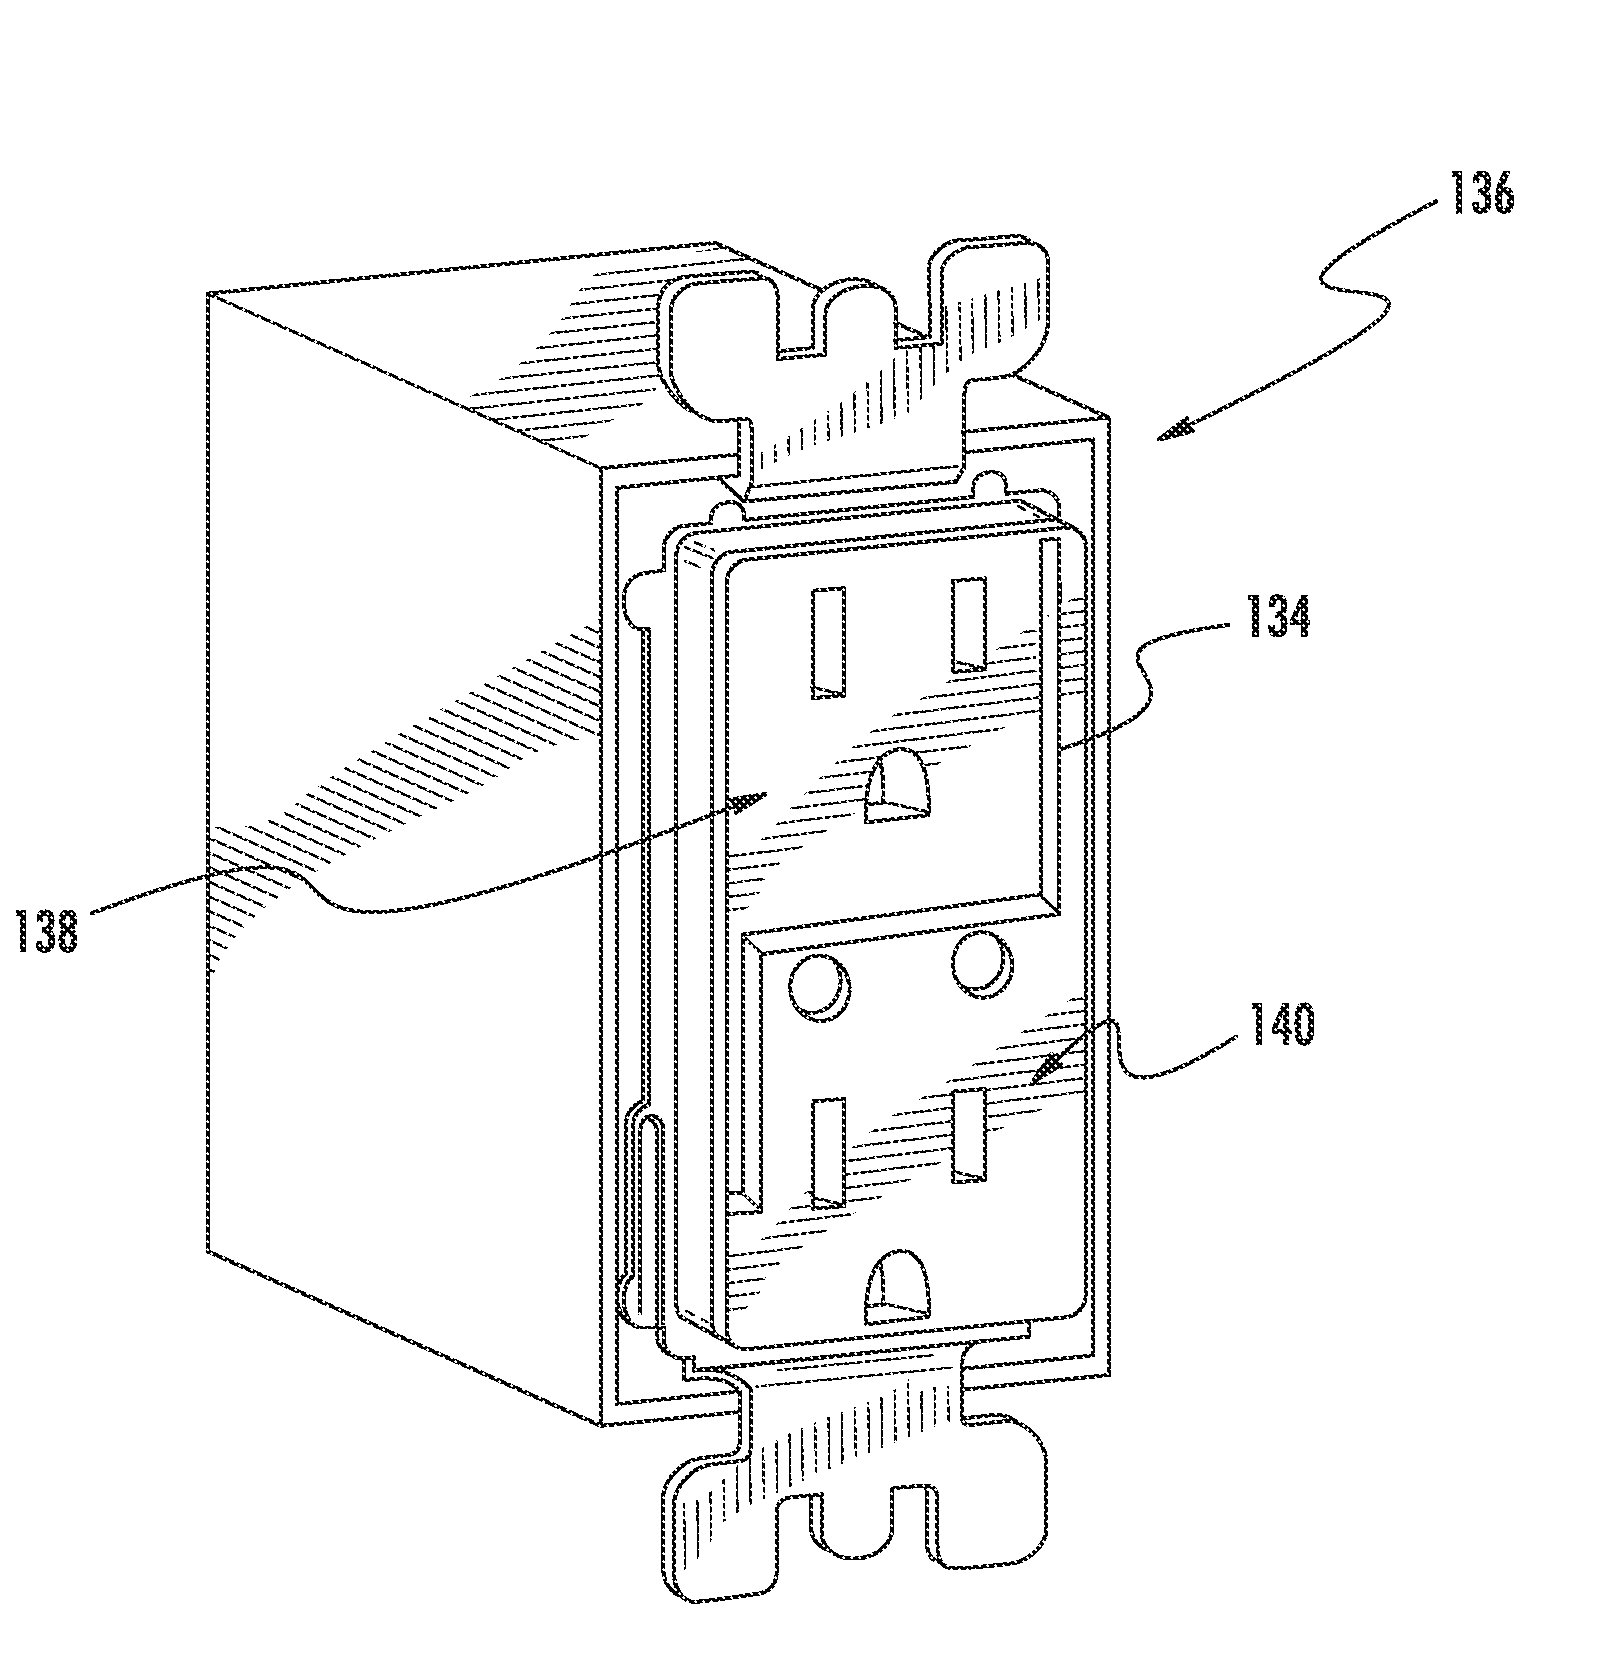 Controllable electrical receptacle with routed antenna